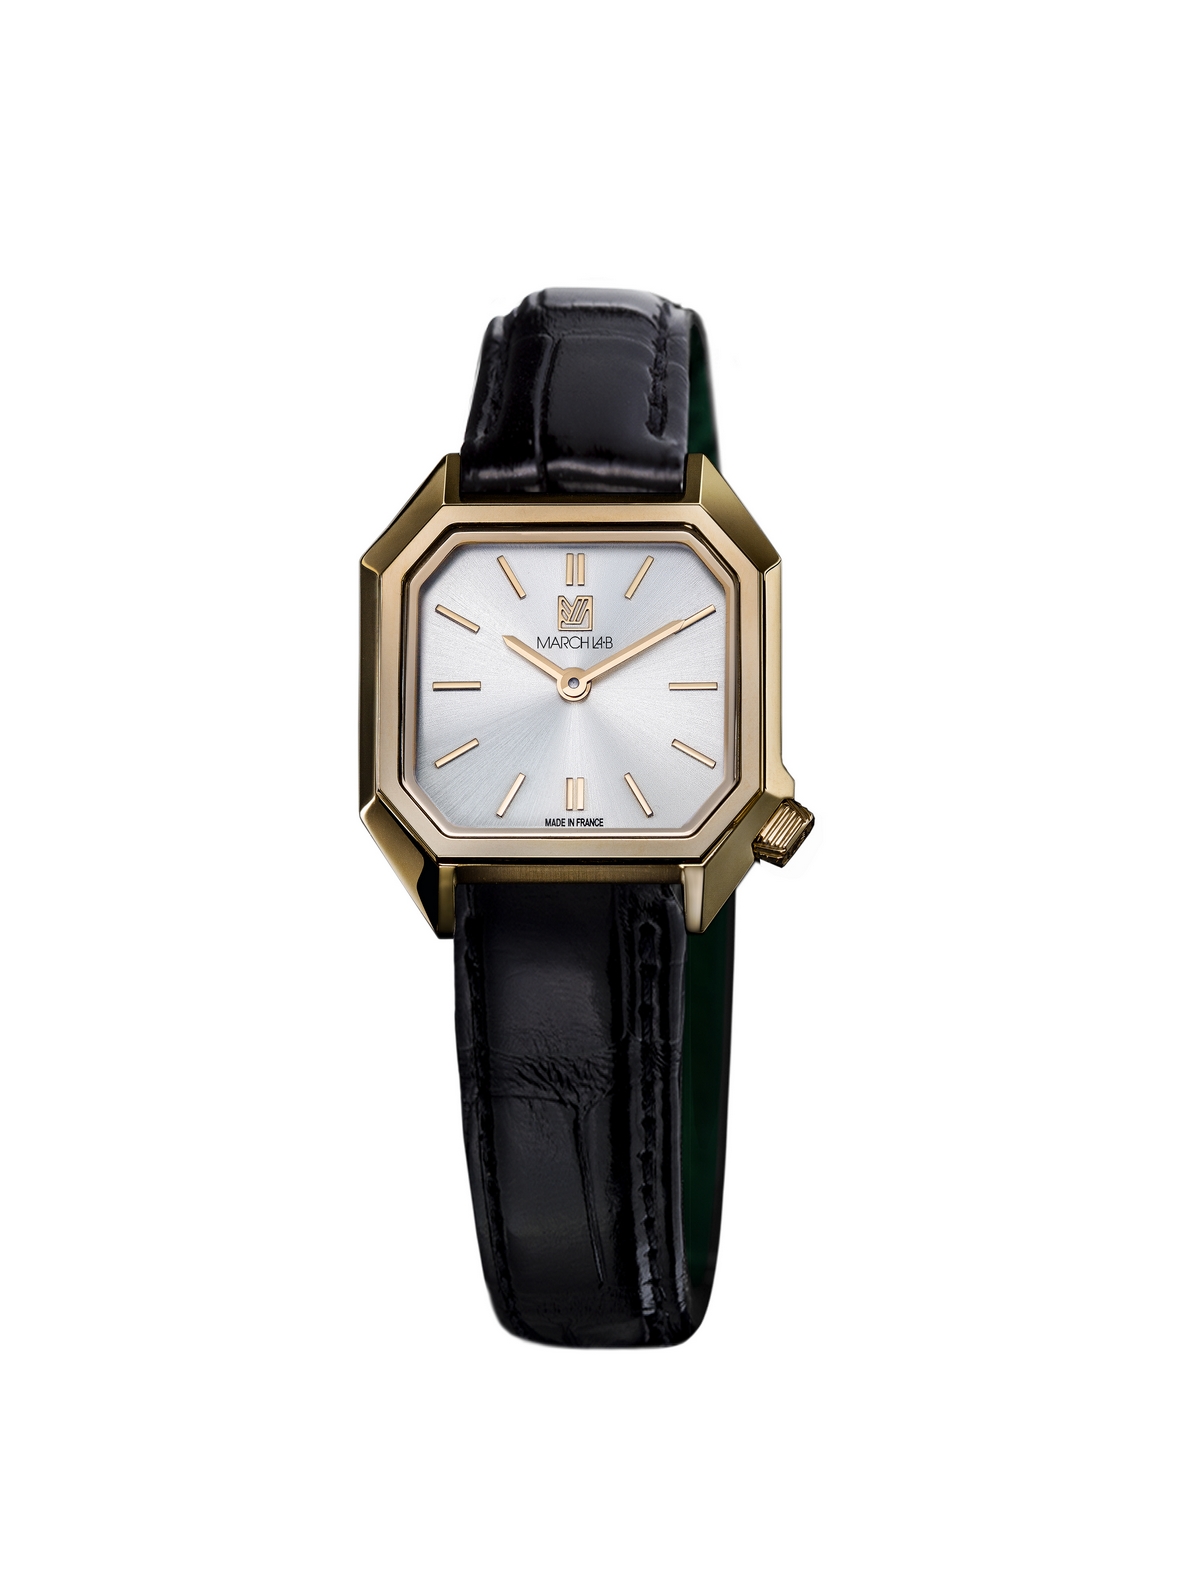 MARCH  Lady Mansart Electric Continental Dial Black Alligator Strap  Watch - Daniel Gerard Luxembourg